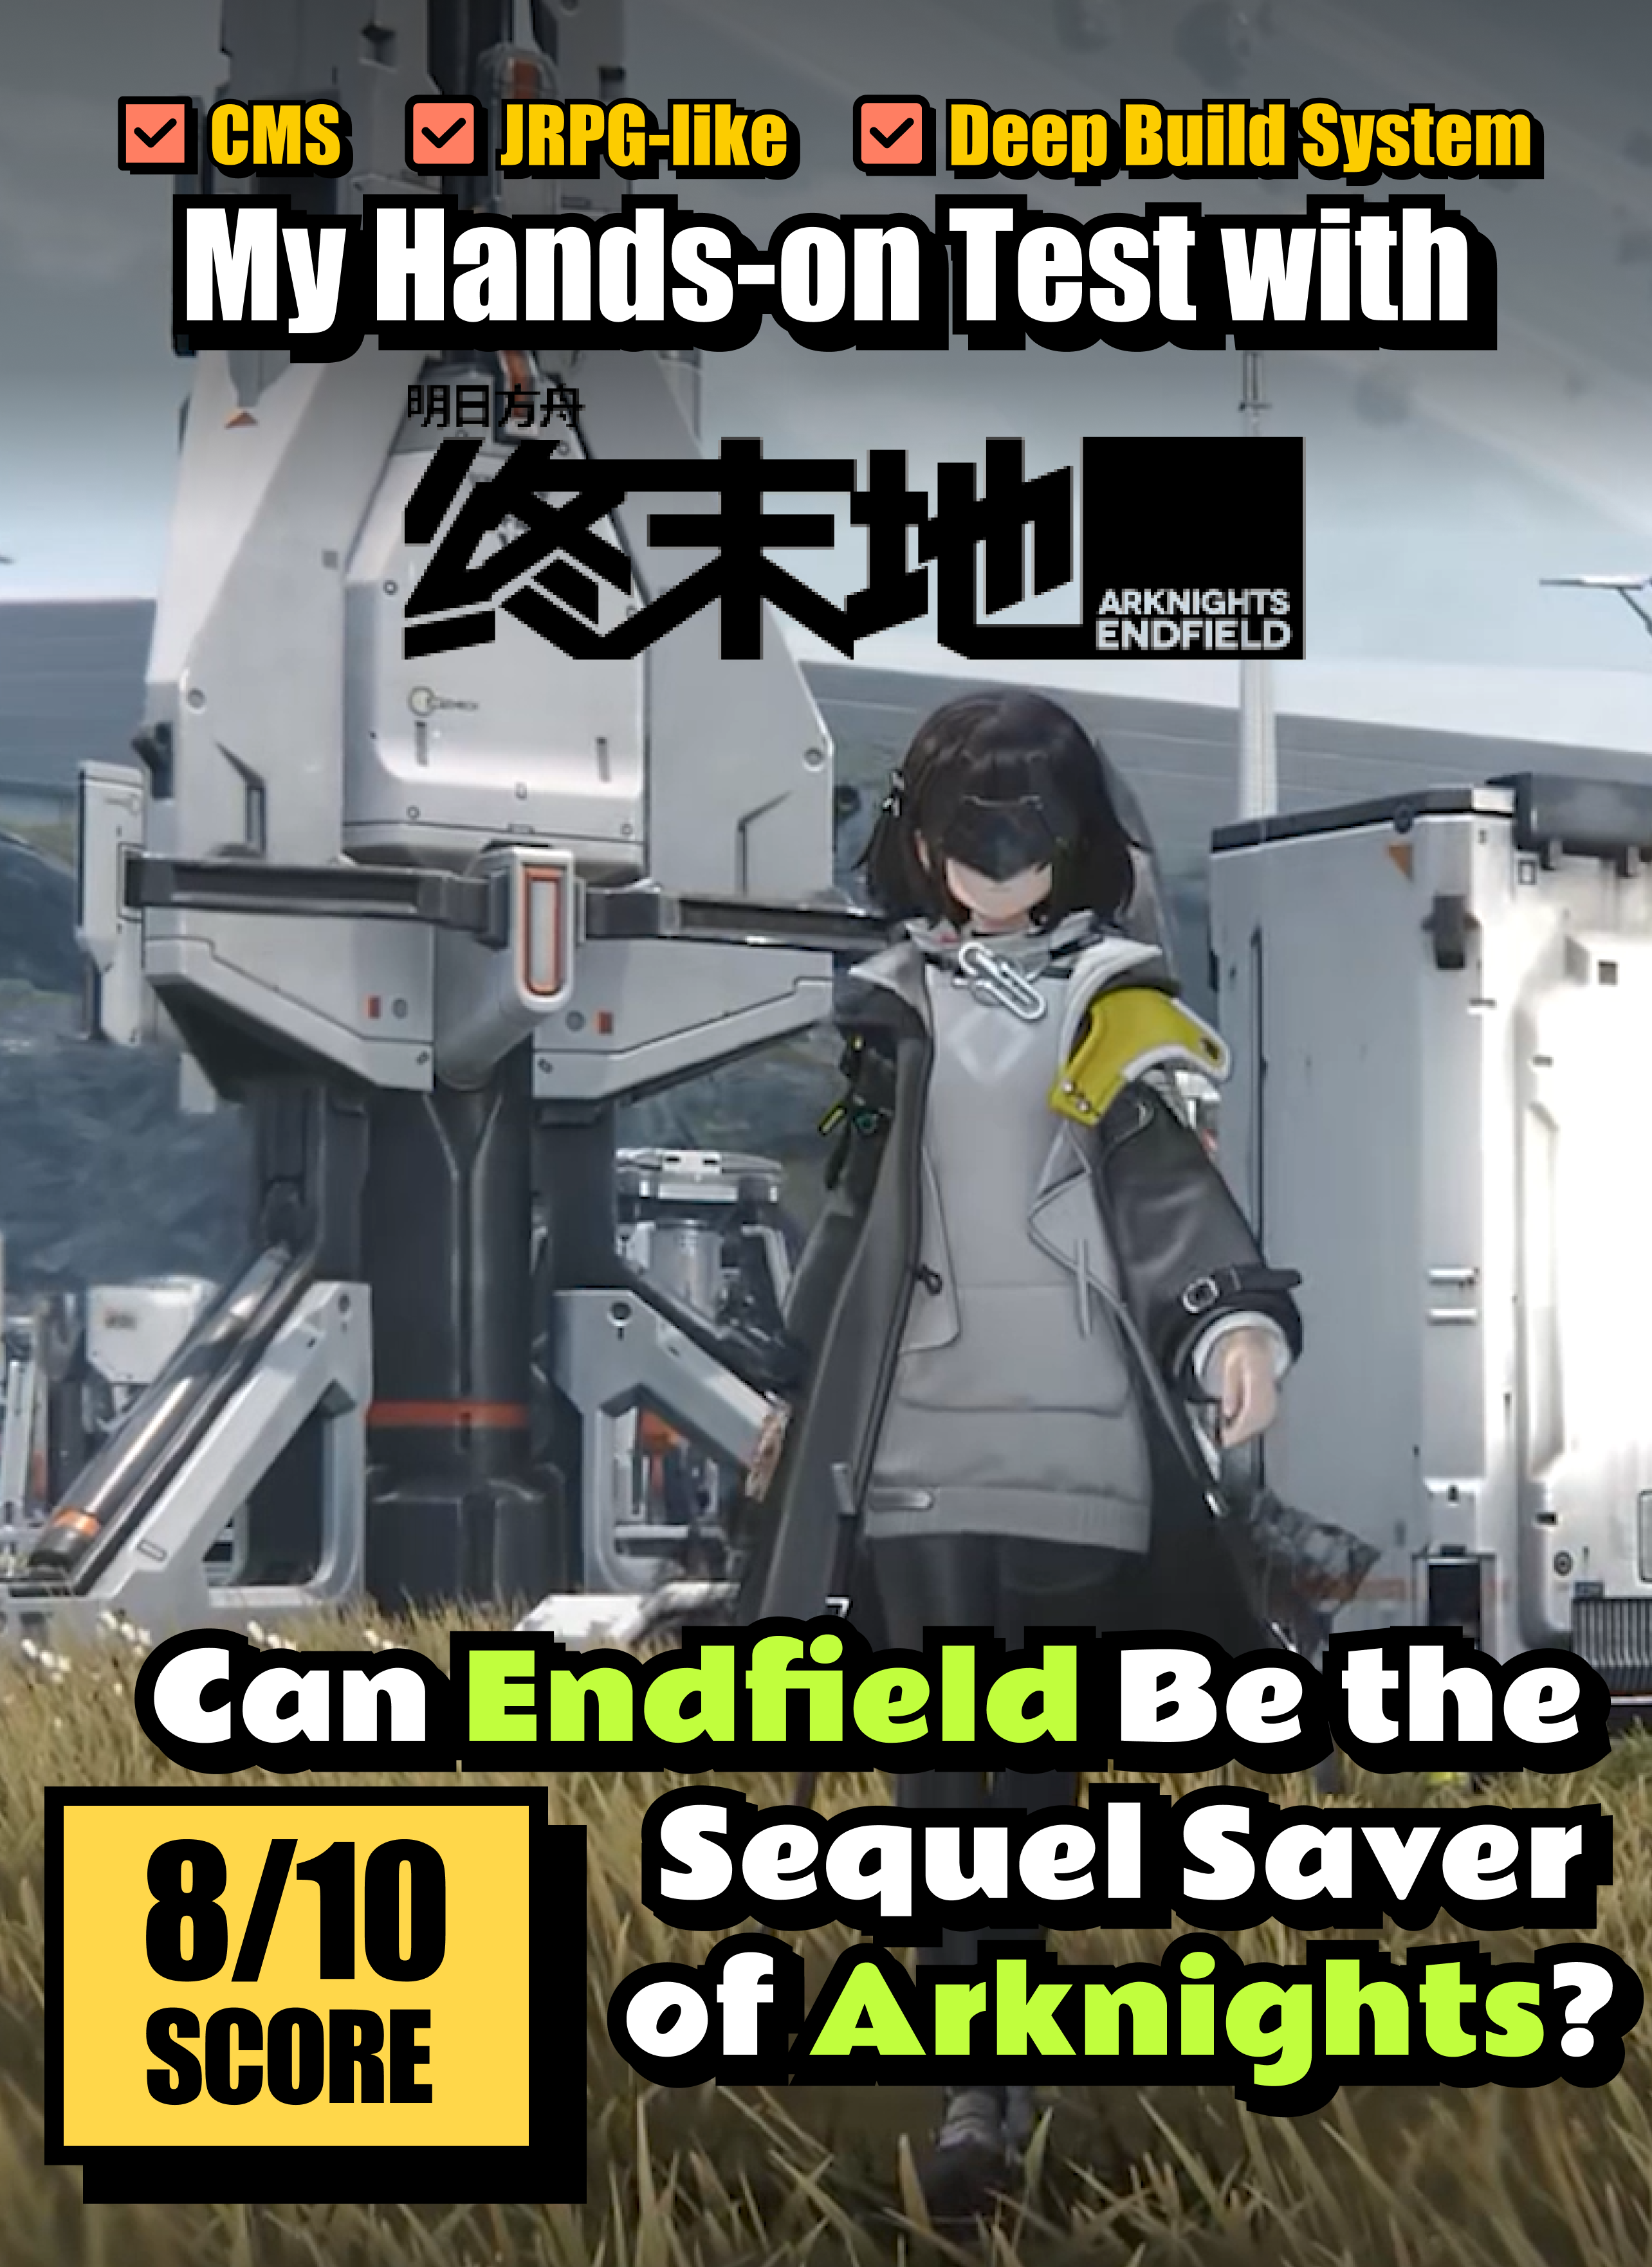 Can Endfield Be the Sequel Saver of Arknights? My hands-on Test with ENDFIELD!